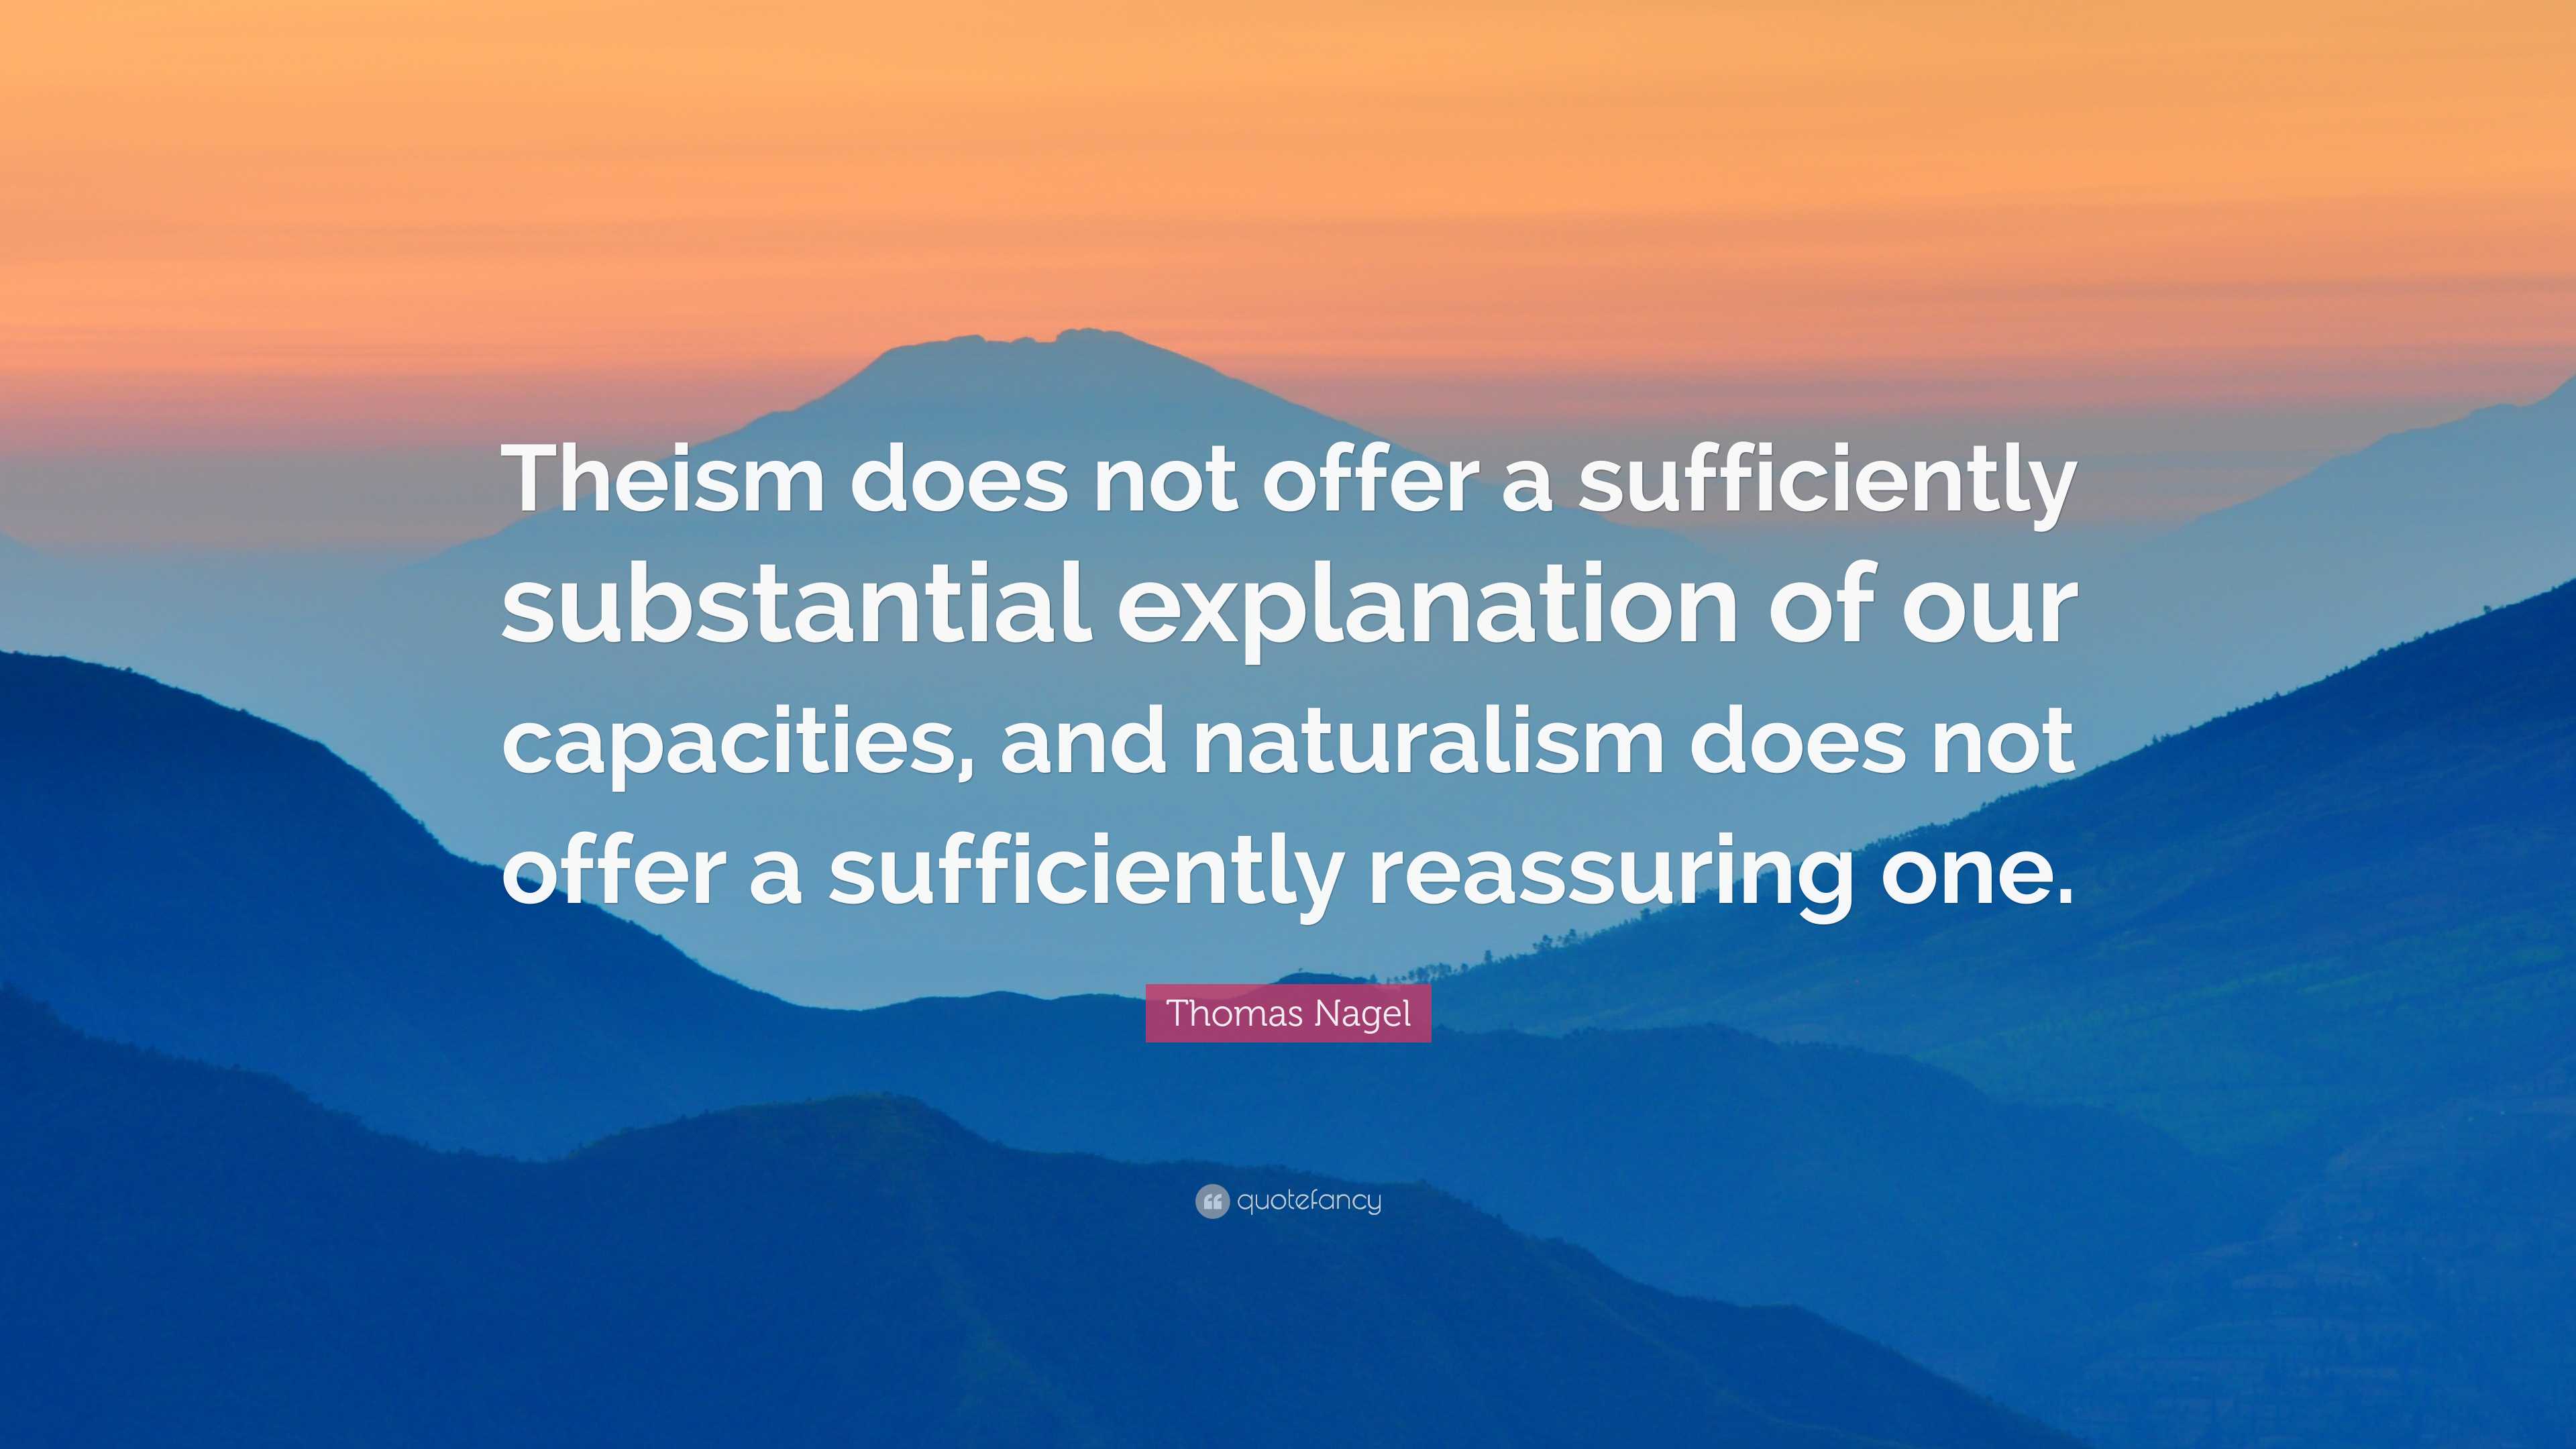 Thomas Nagel Quote: “Theism does not offer a sufficiently substantial ...